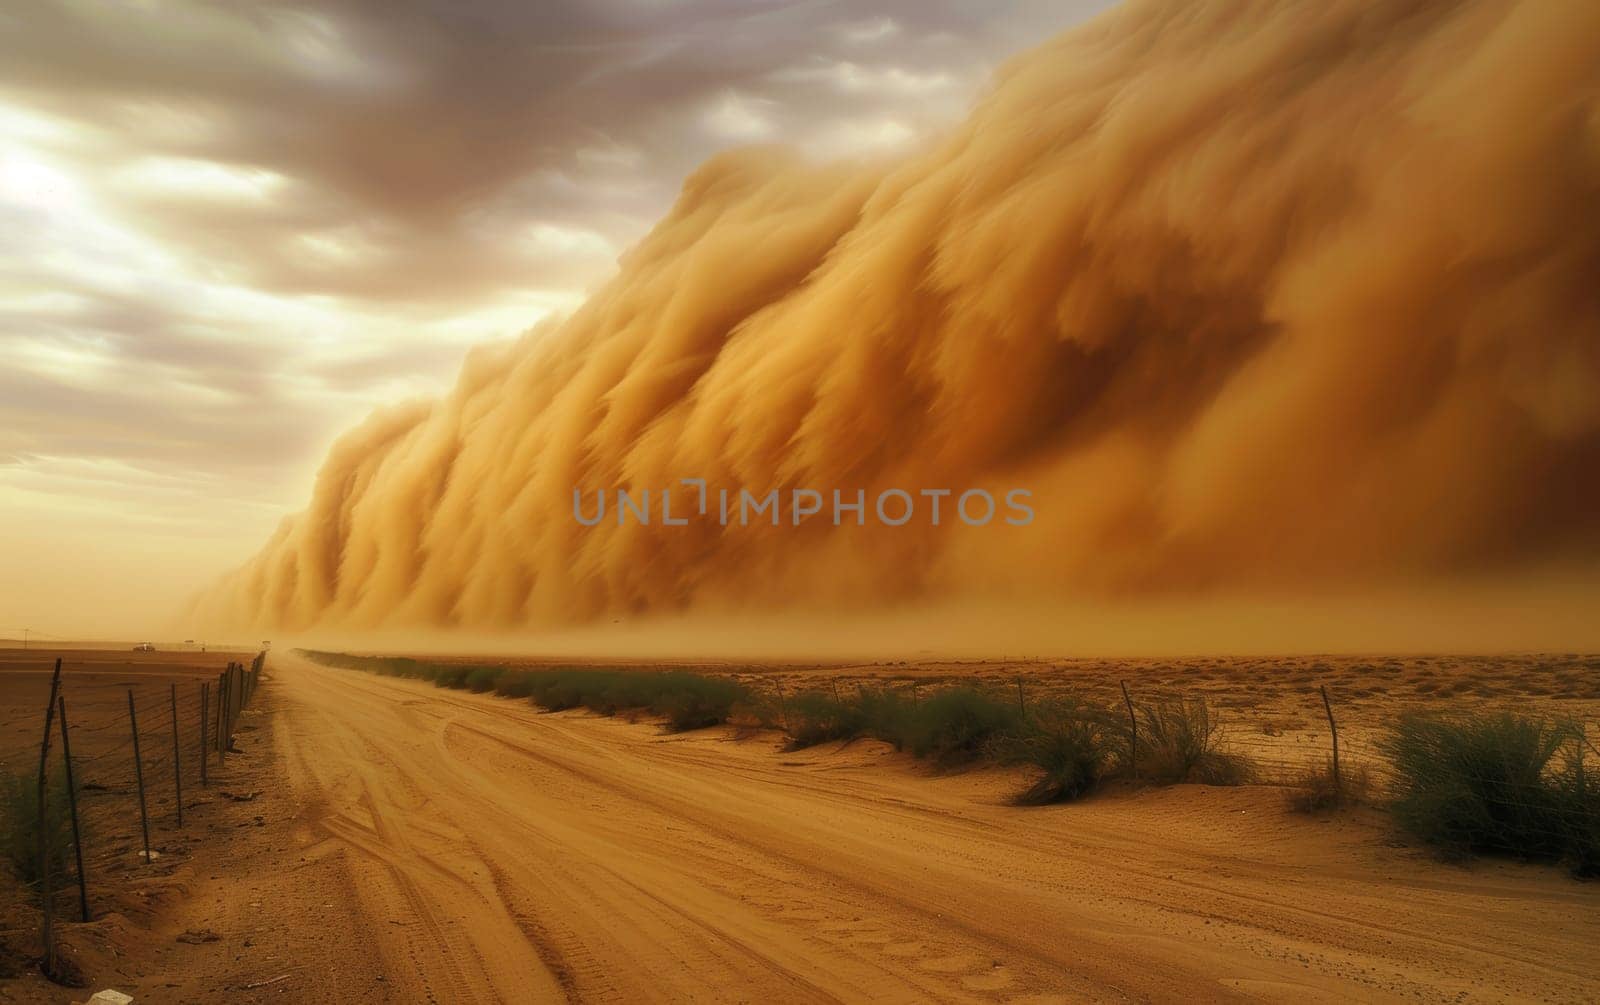 Monstrous sandstorm sweeps across a desert path, engulfing the environment in a thick cloud of sand with dramatic lighting